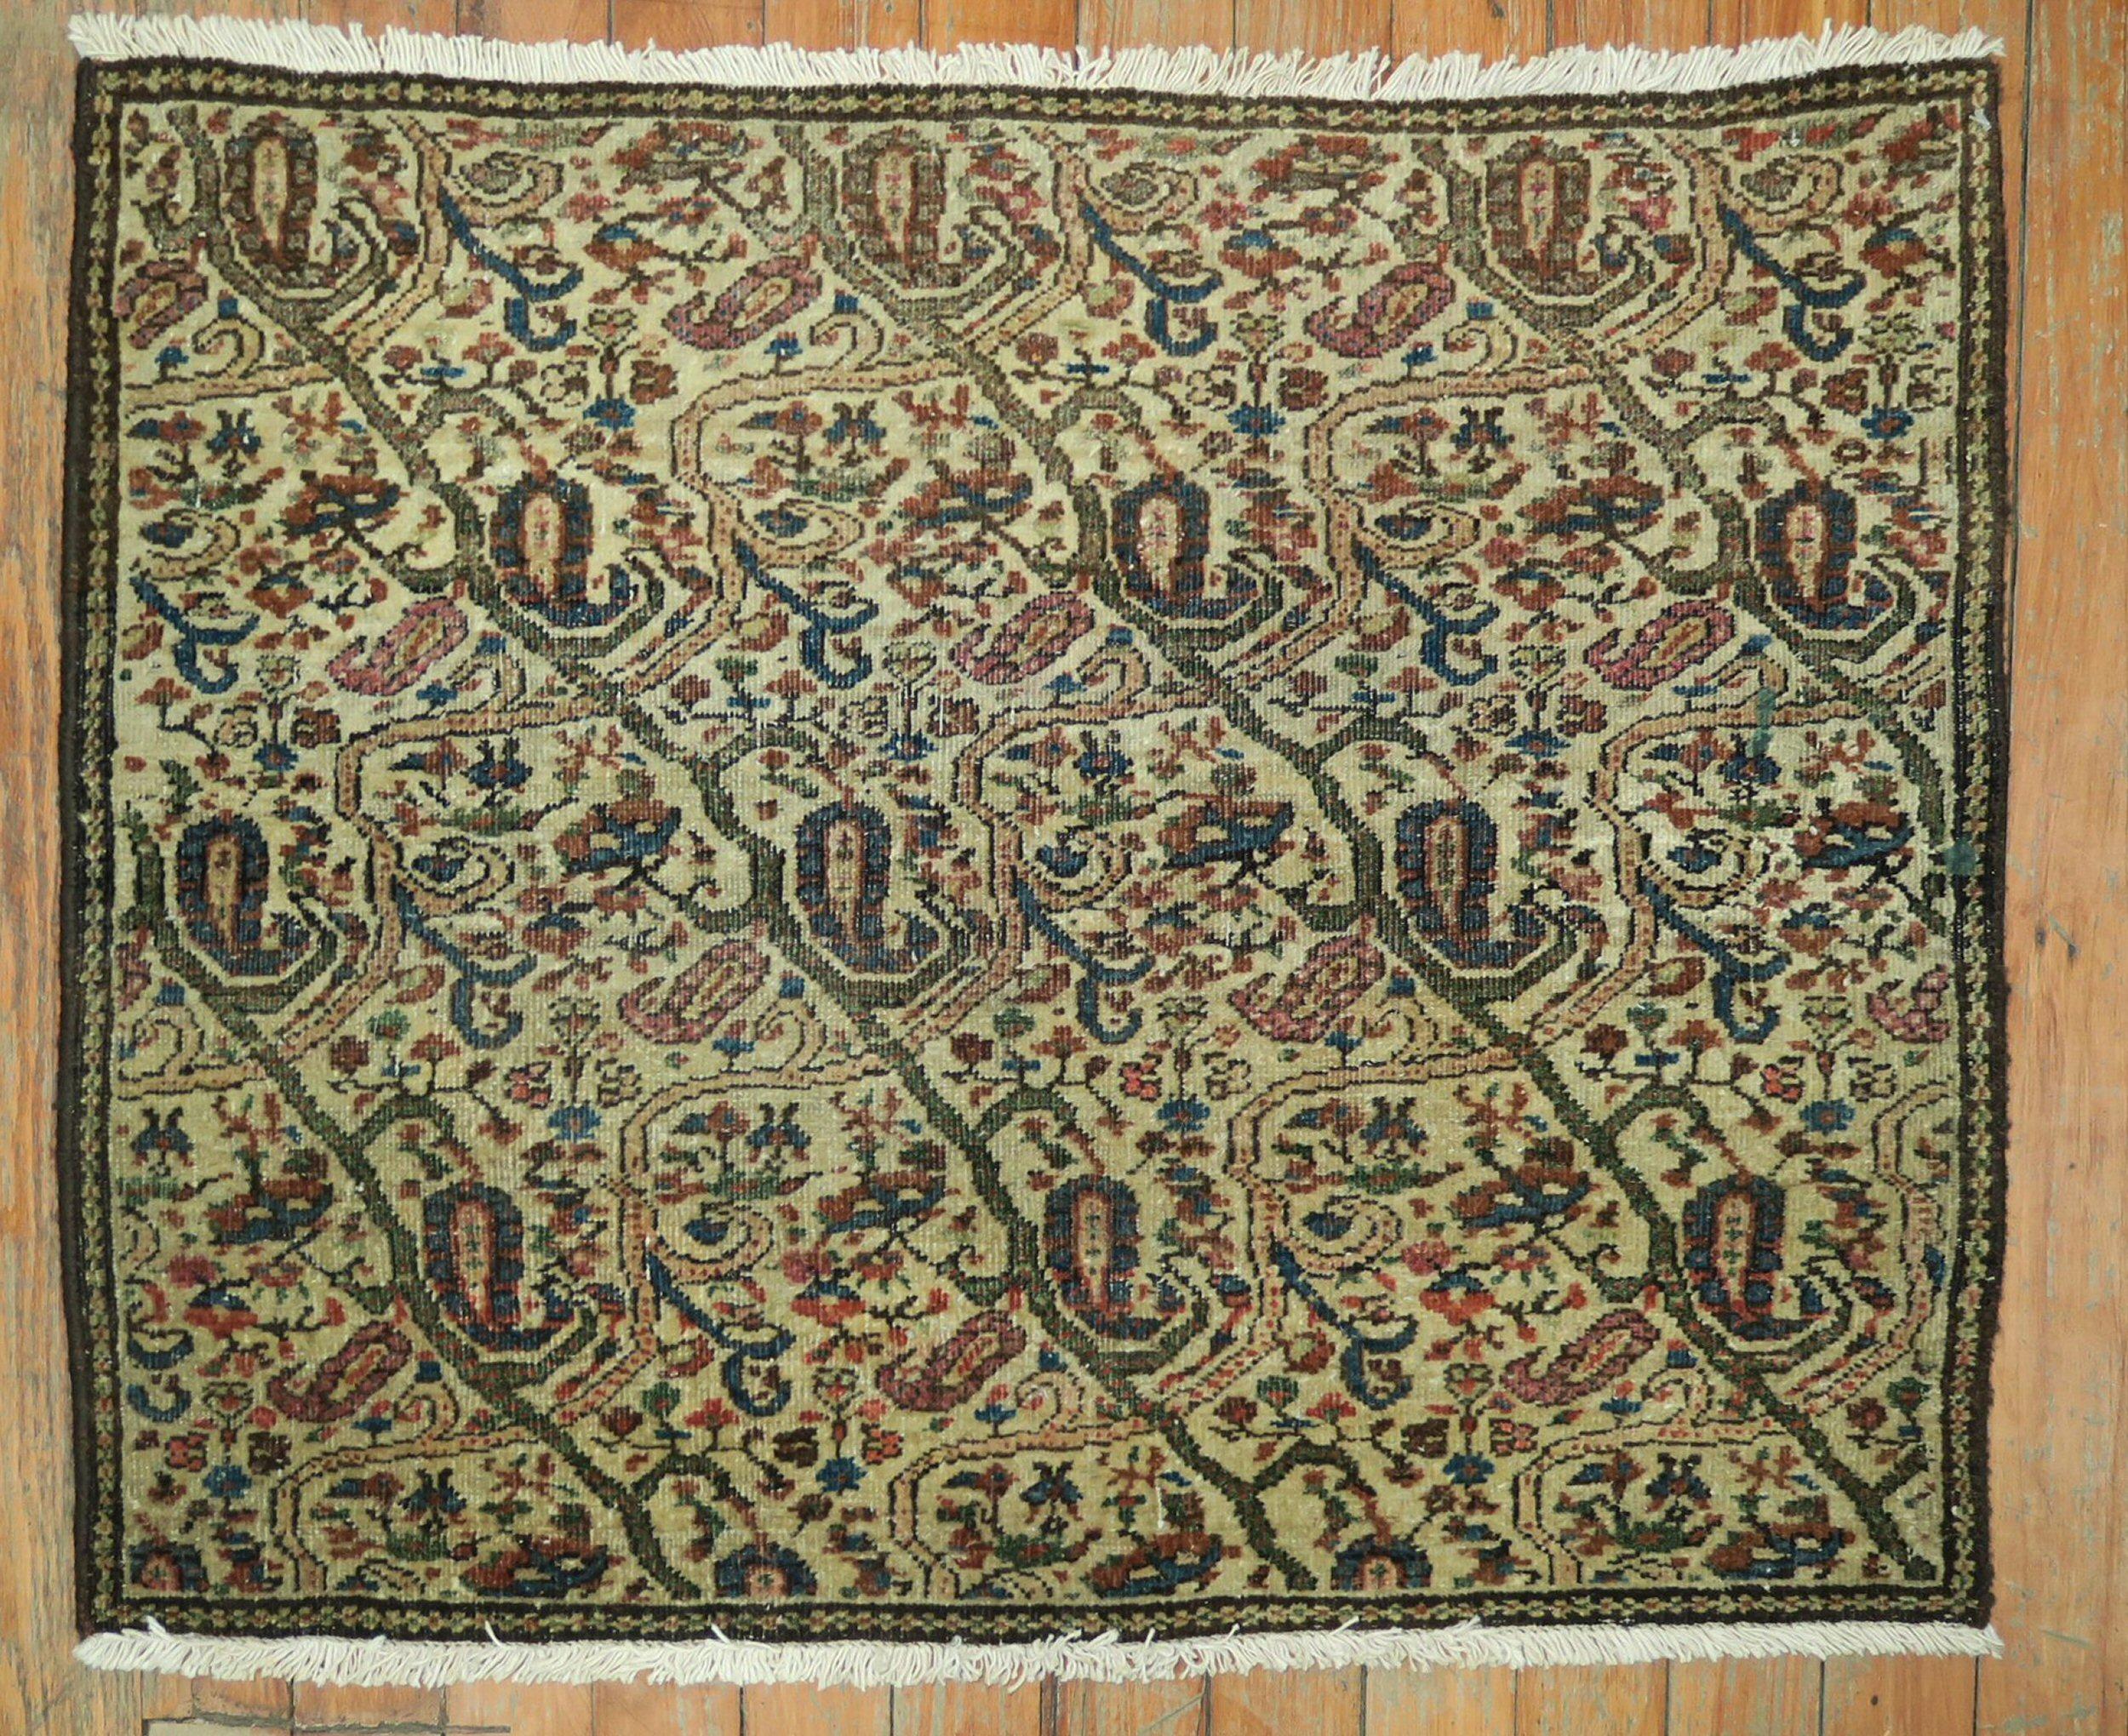 an early 20th Century Persian Fereghan mini square size rug

22'' x 28''